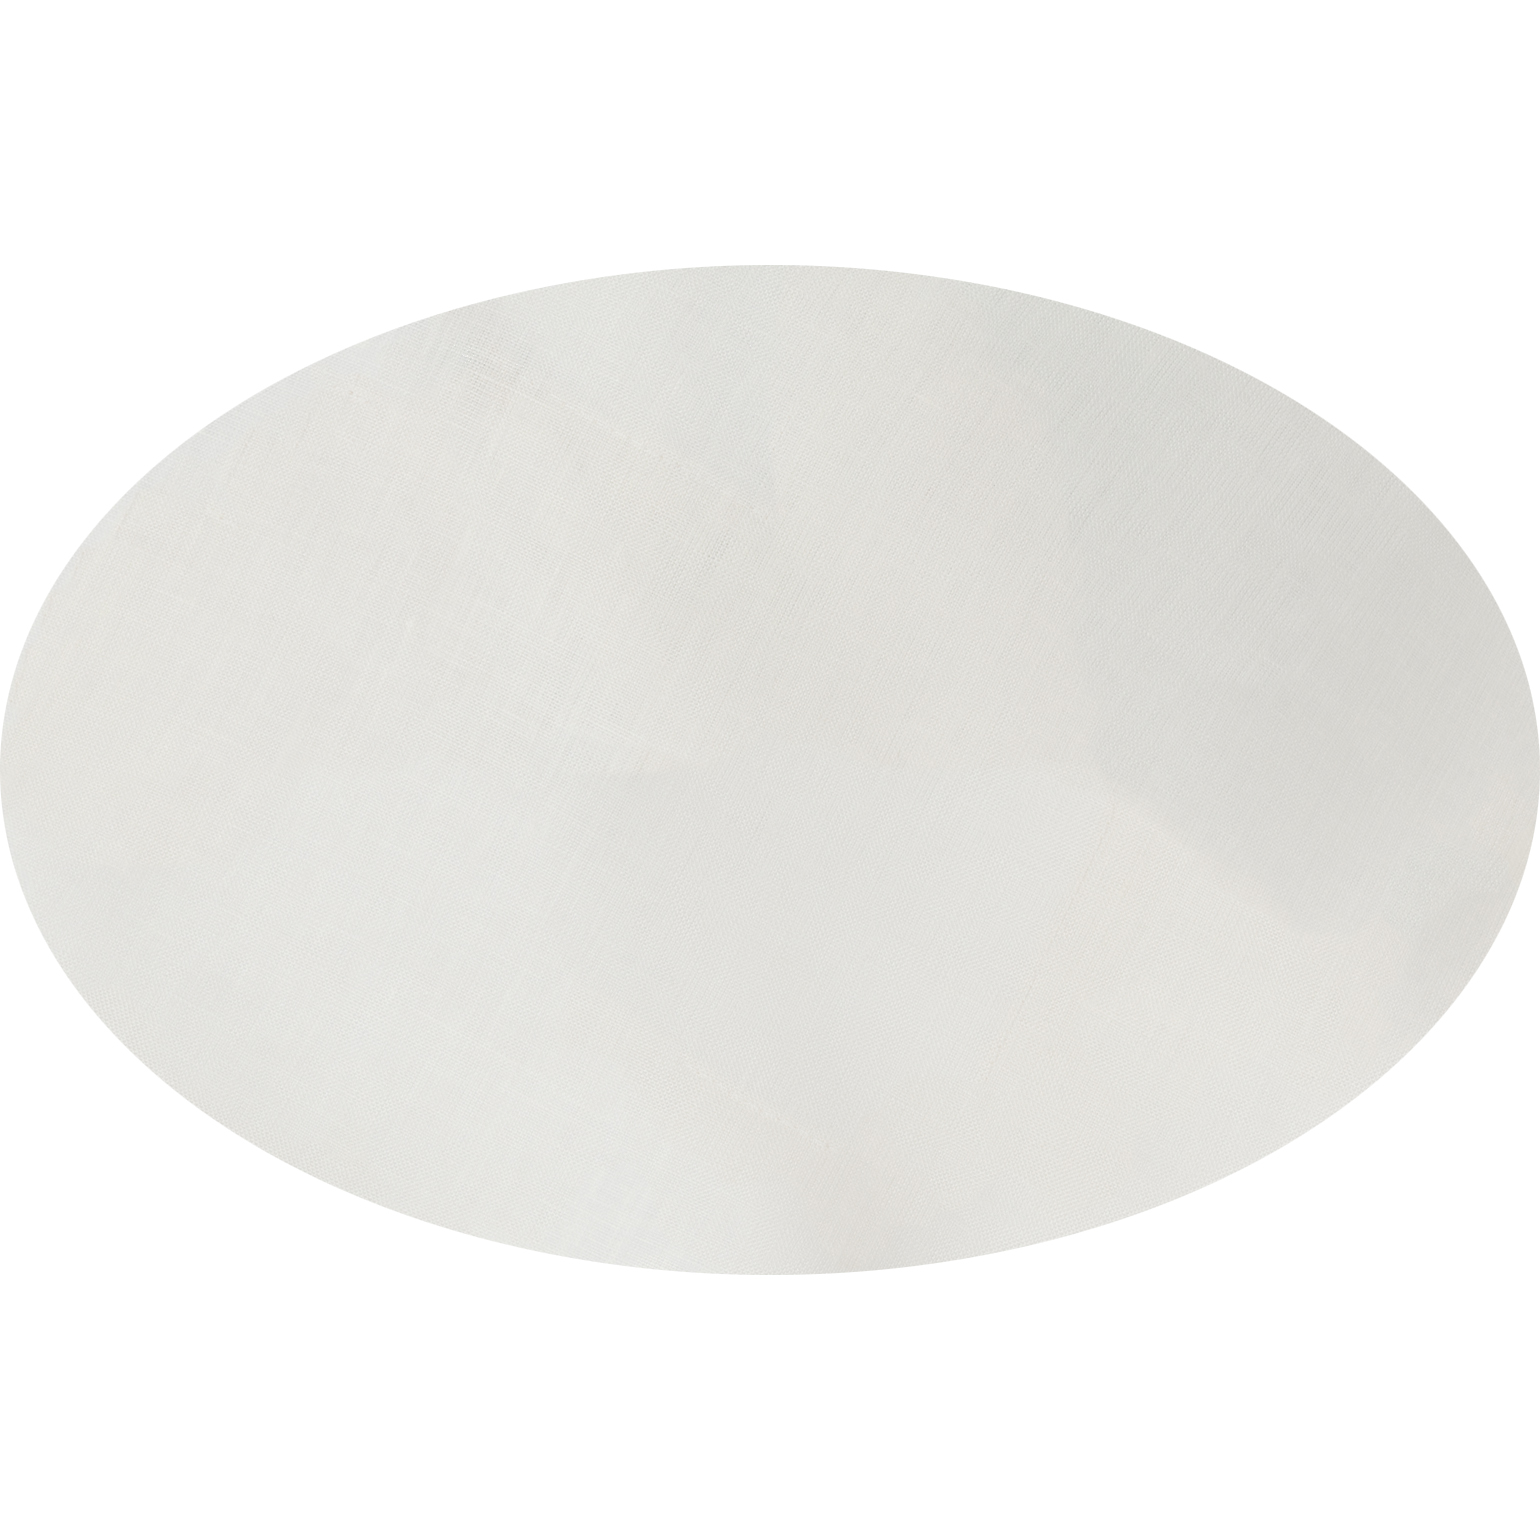 Ivory Tablecloth Oval Linen- $195